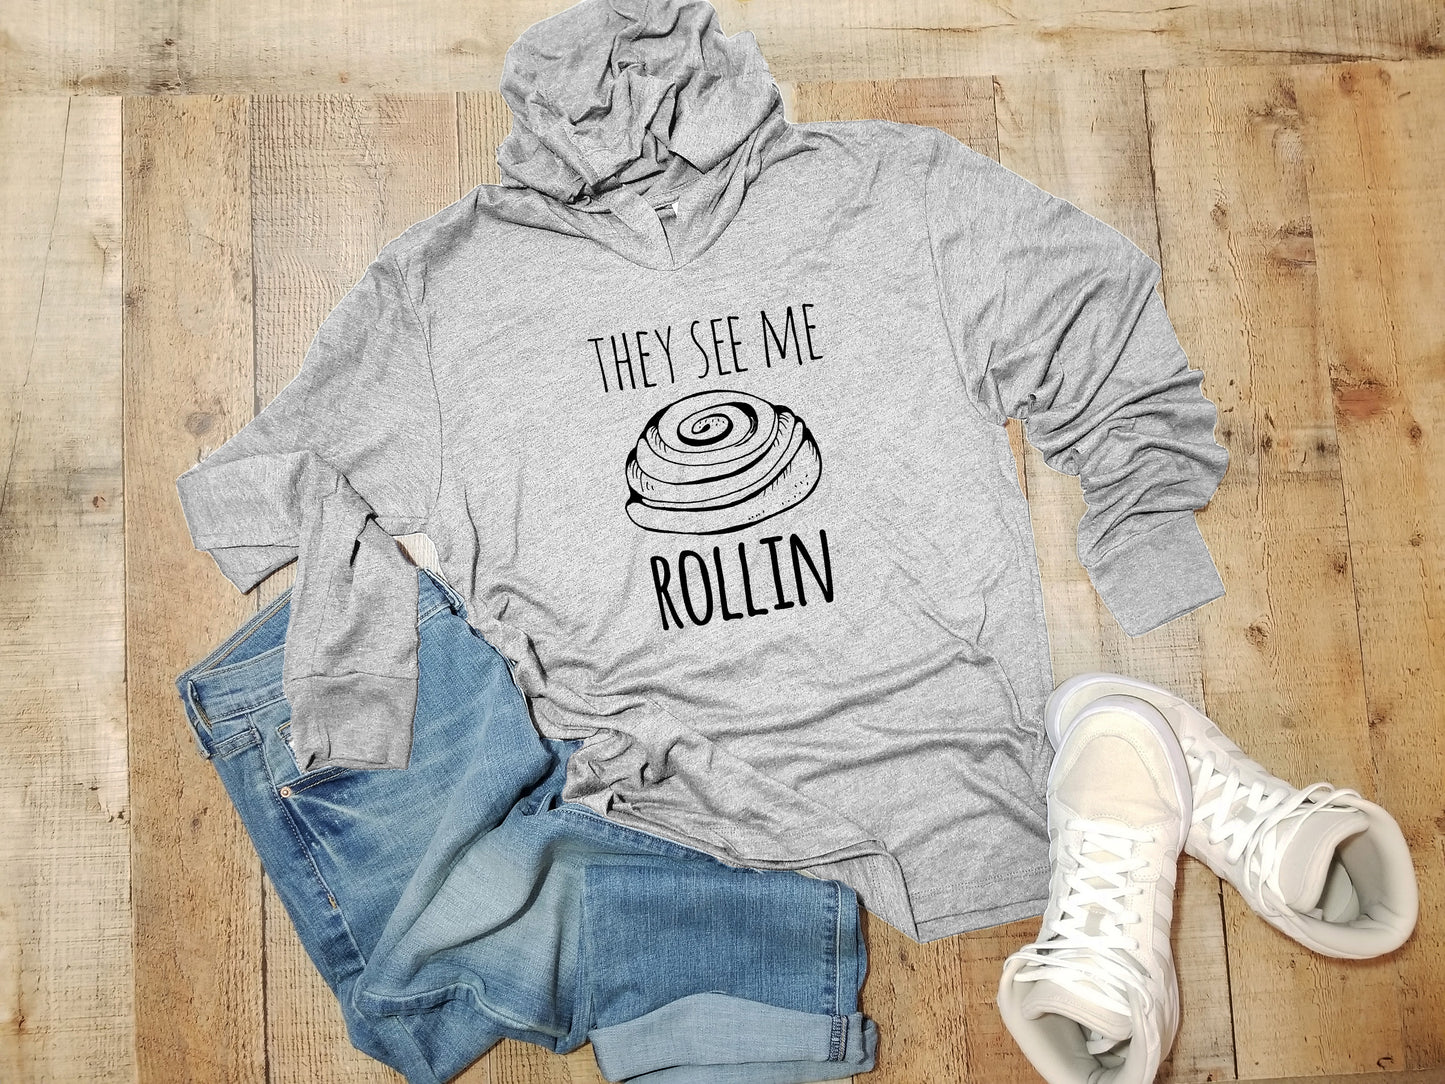 They See Me Rollin' (Cinnamon Roll) - Unisex T-Shirt Hoodie - Heather Gray